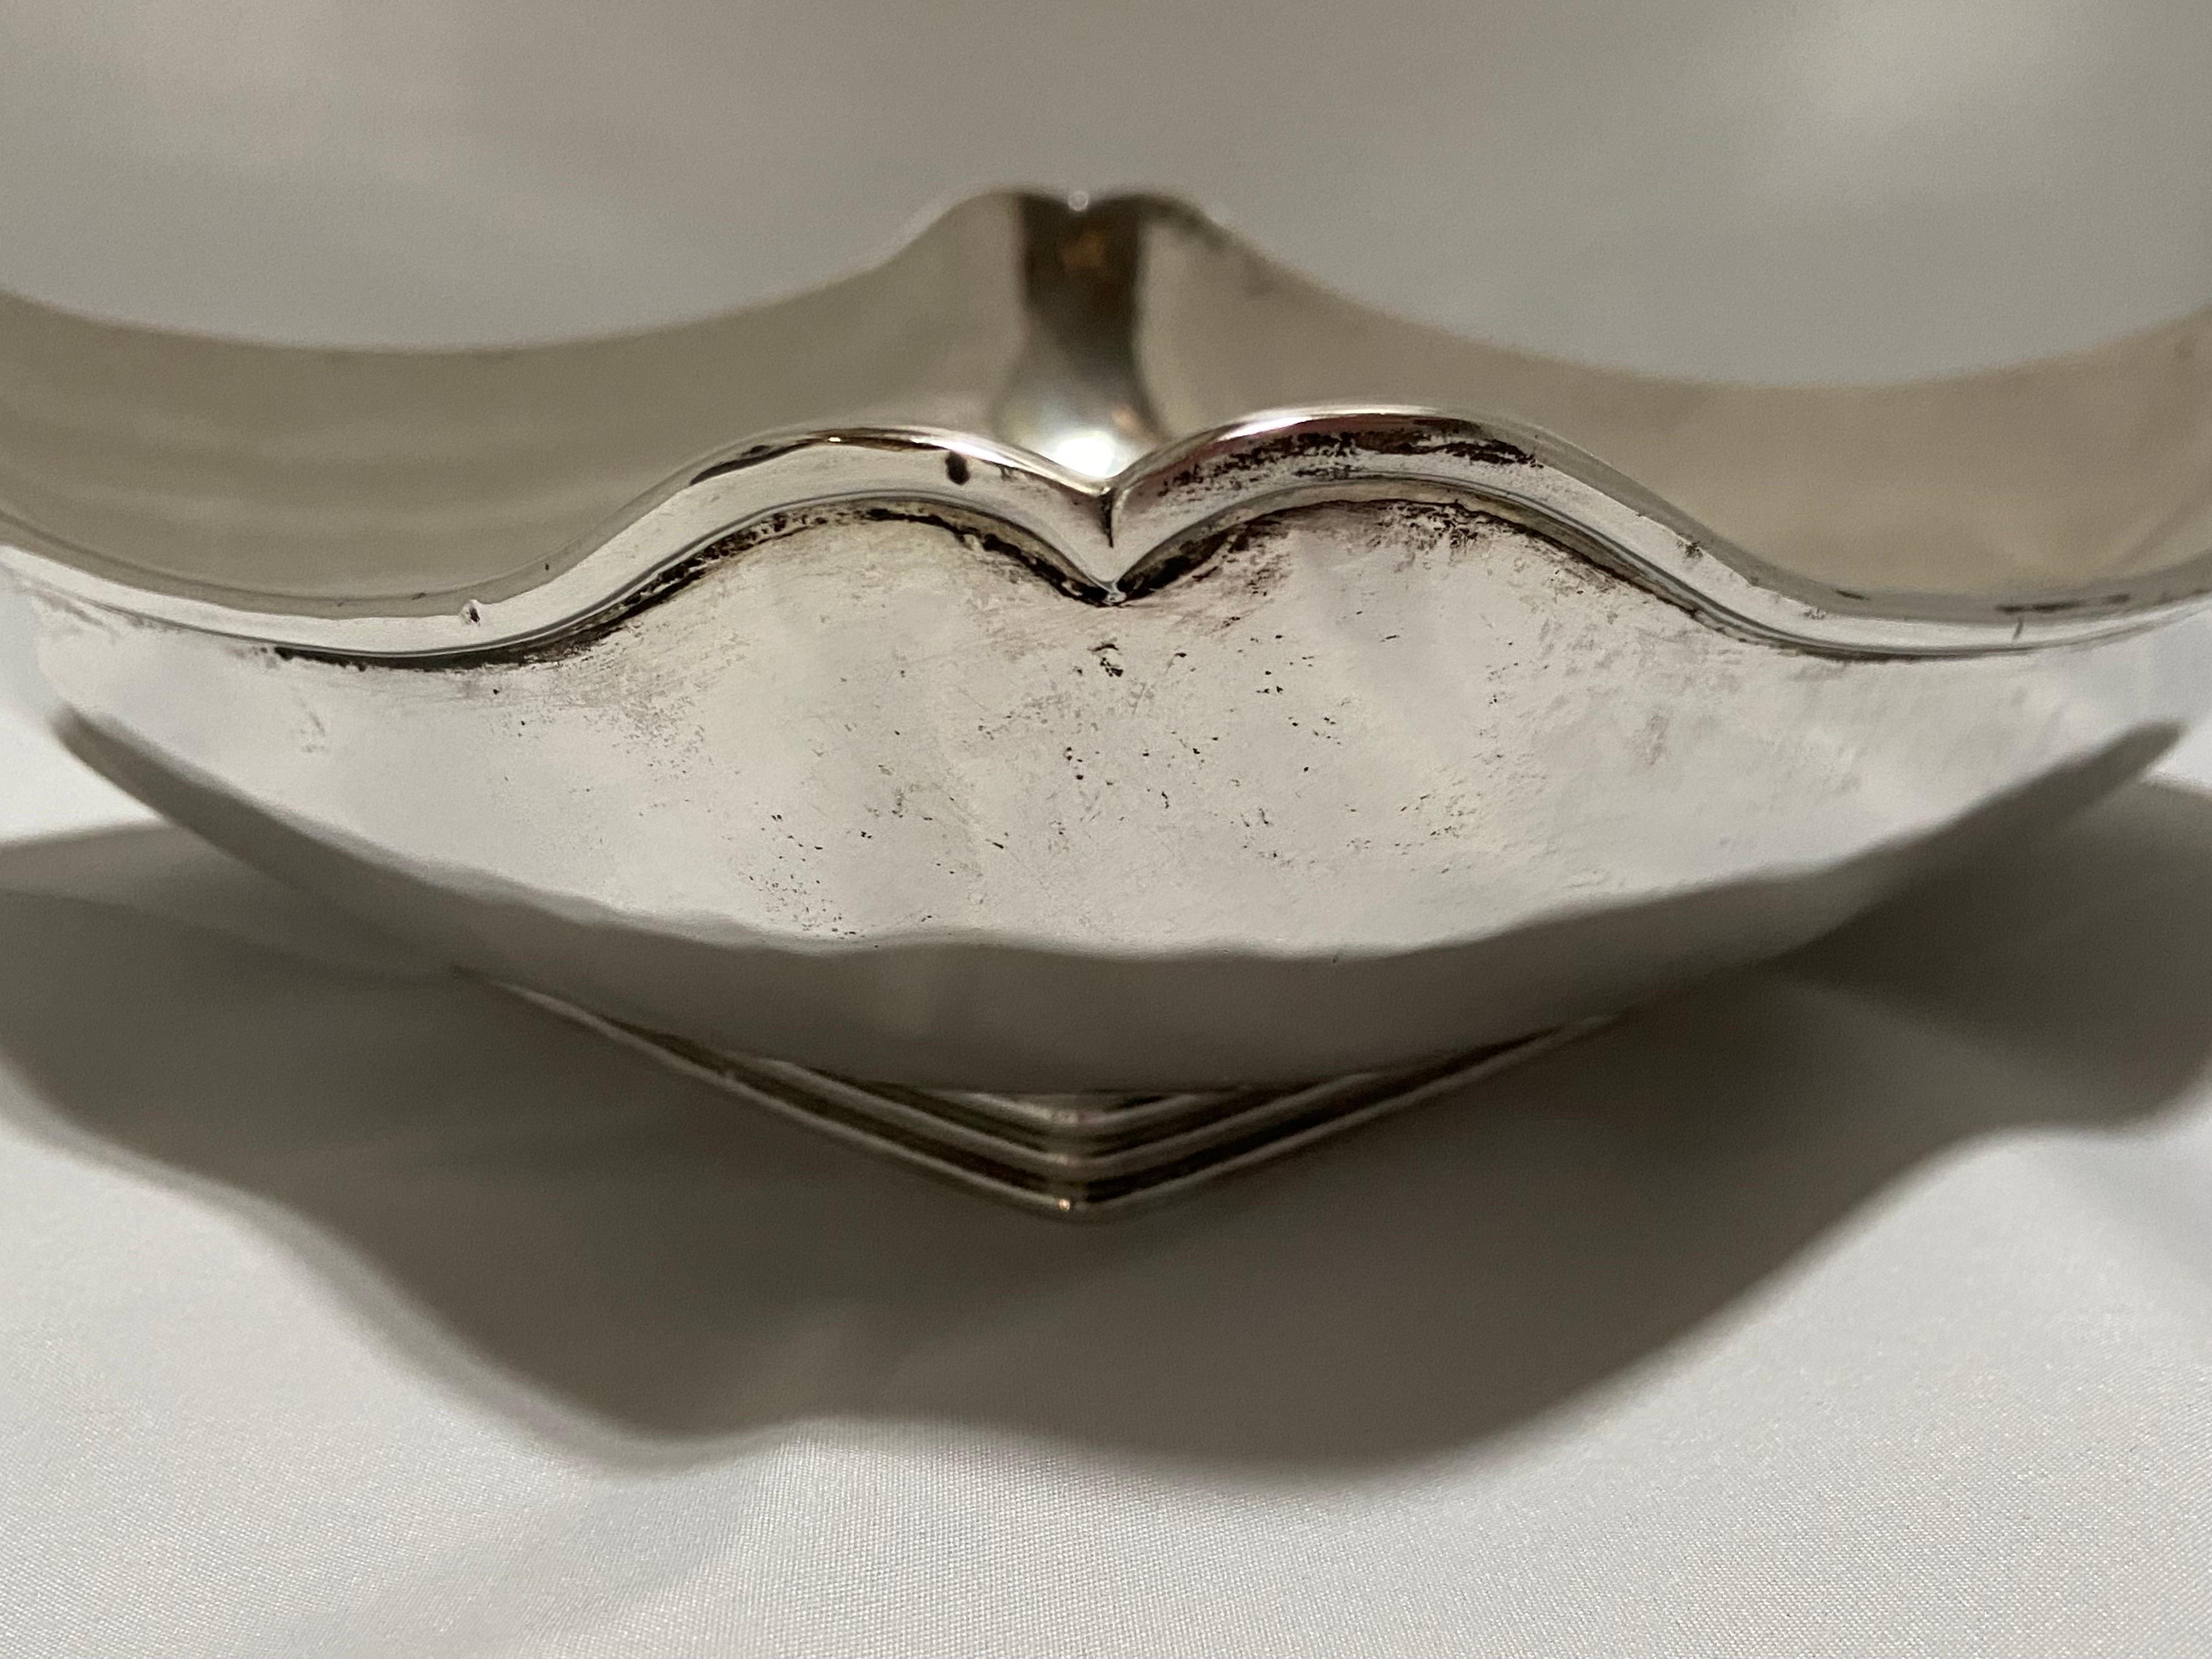 Vintage Mexican Mid-Century Modern Sterling Silver Scalloped Bowl by C. Zurita For Sale 6